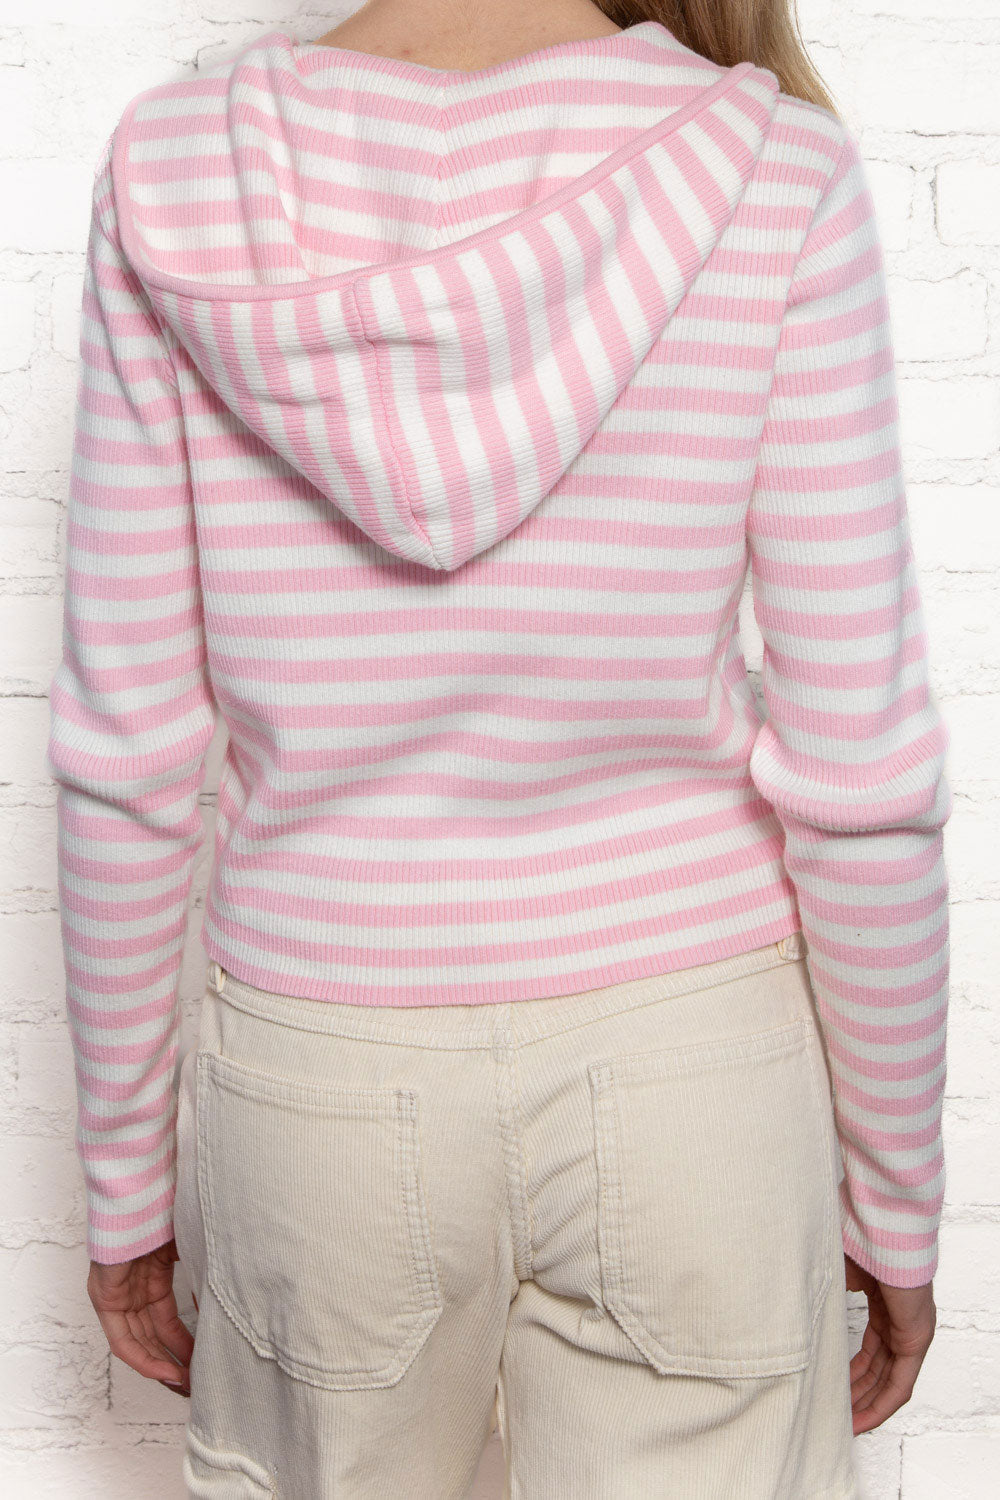 Light Pink and White Stripes 